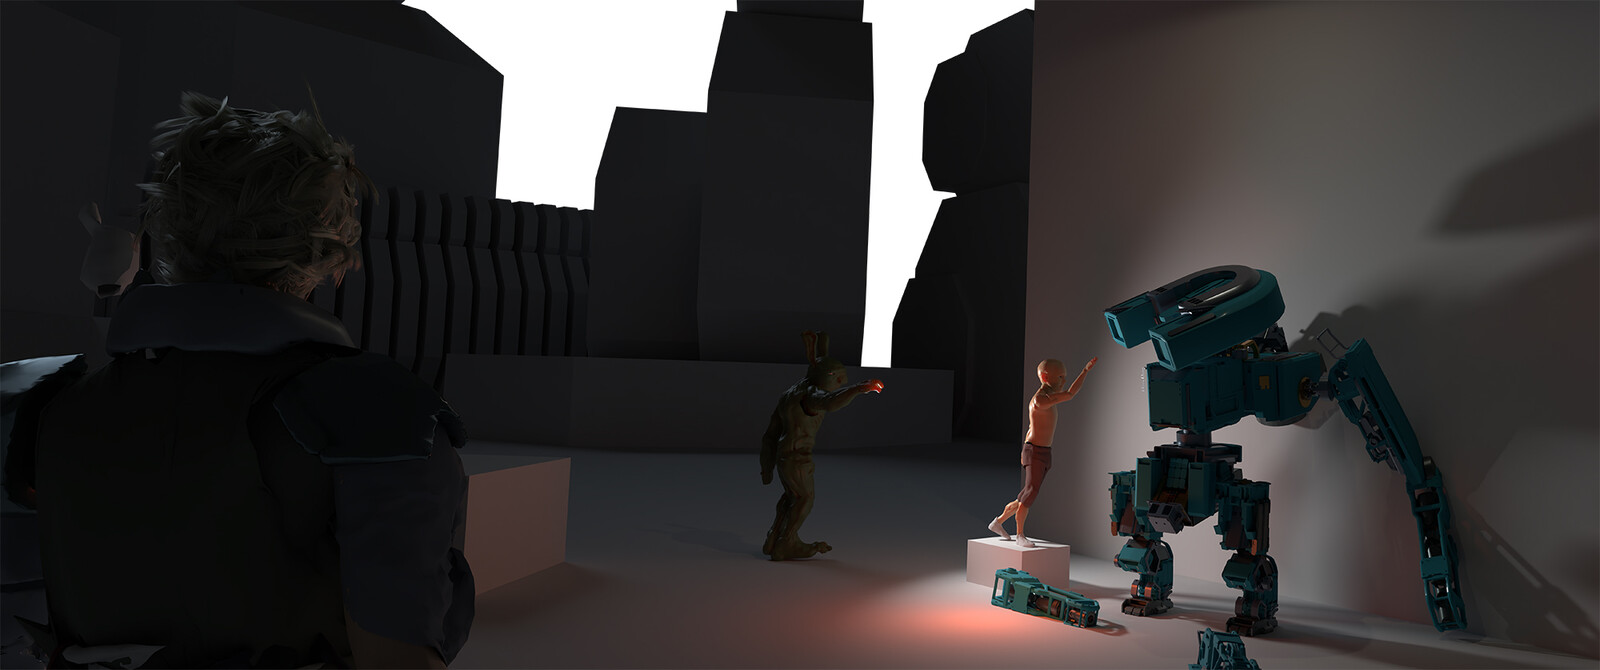 The original blockout/composition. Re-arranged the characters to place more emphasis on the environment.